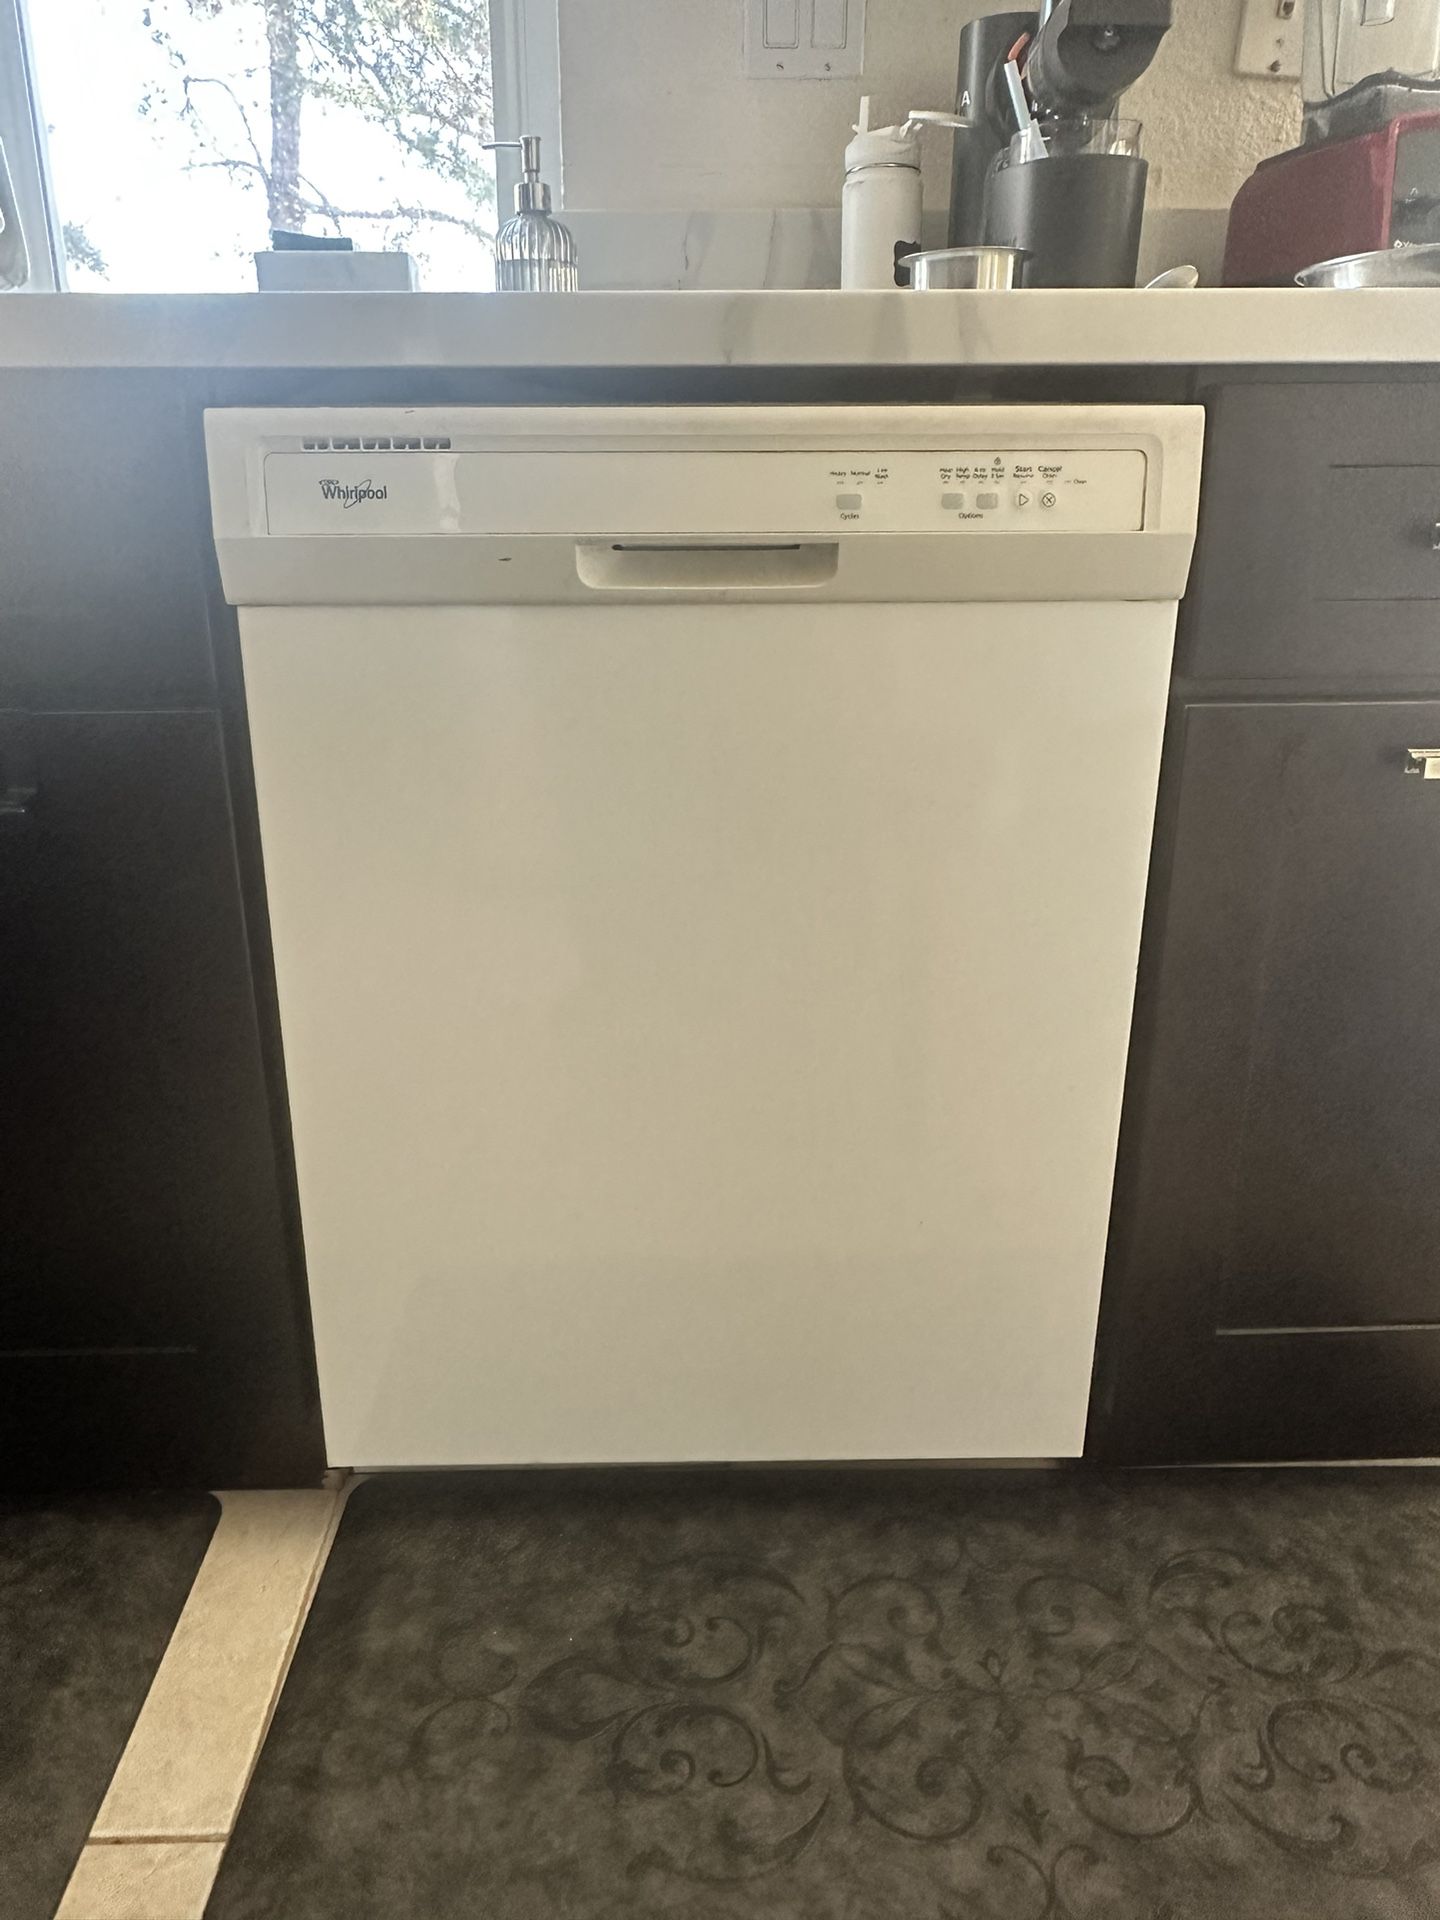 Used Whirlpool Dishwasher for sale